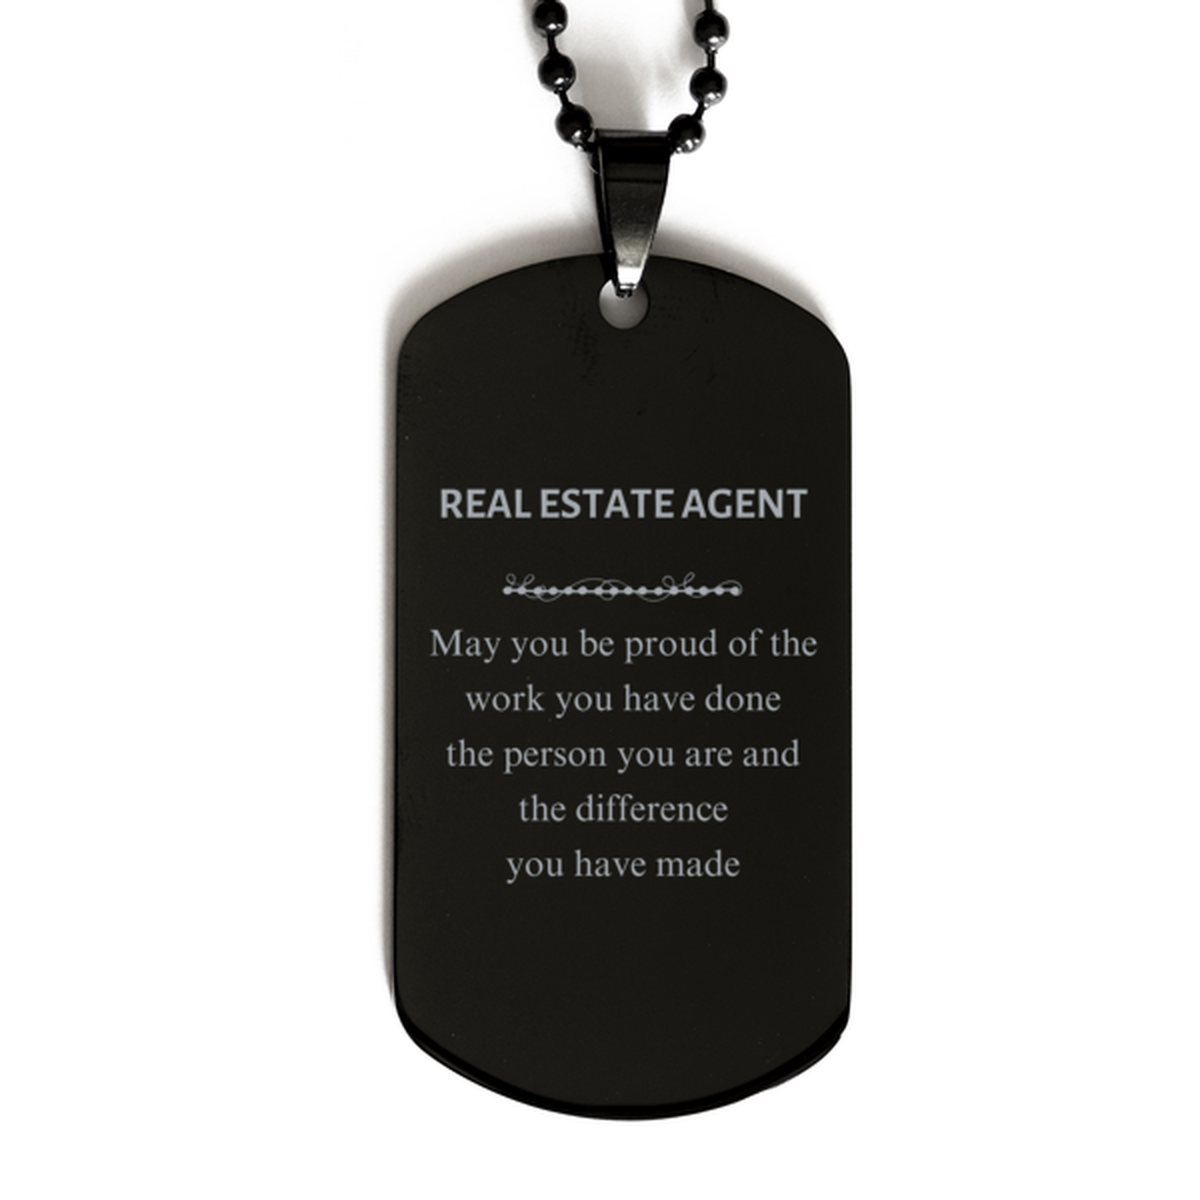 Real Estate Agent May you be proud of the work you have done, Retirement Real Estate Agent Black Dog Tag for Colleague Appreciation Gifts Amazing for Real Estate Agent